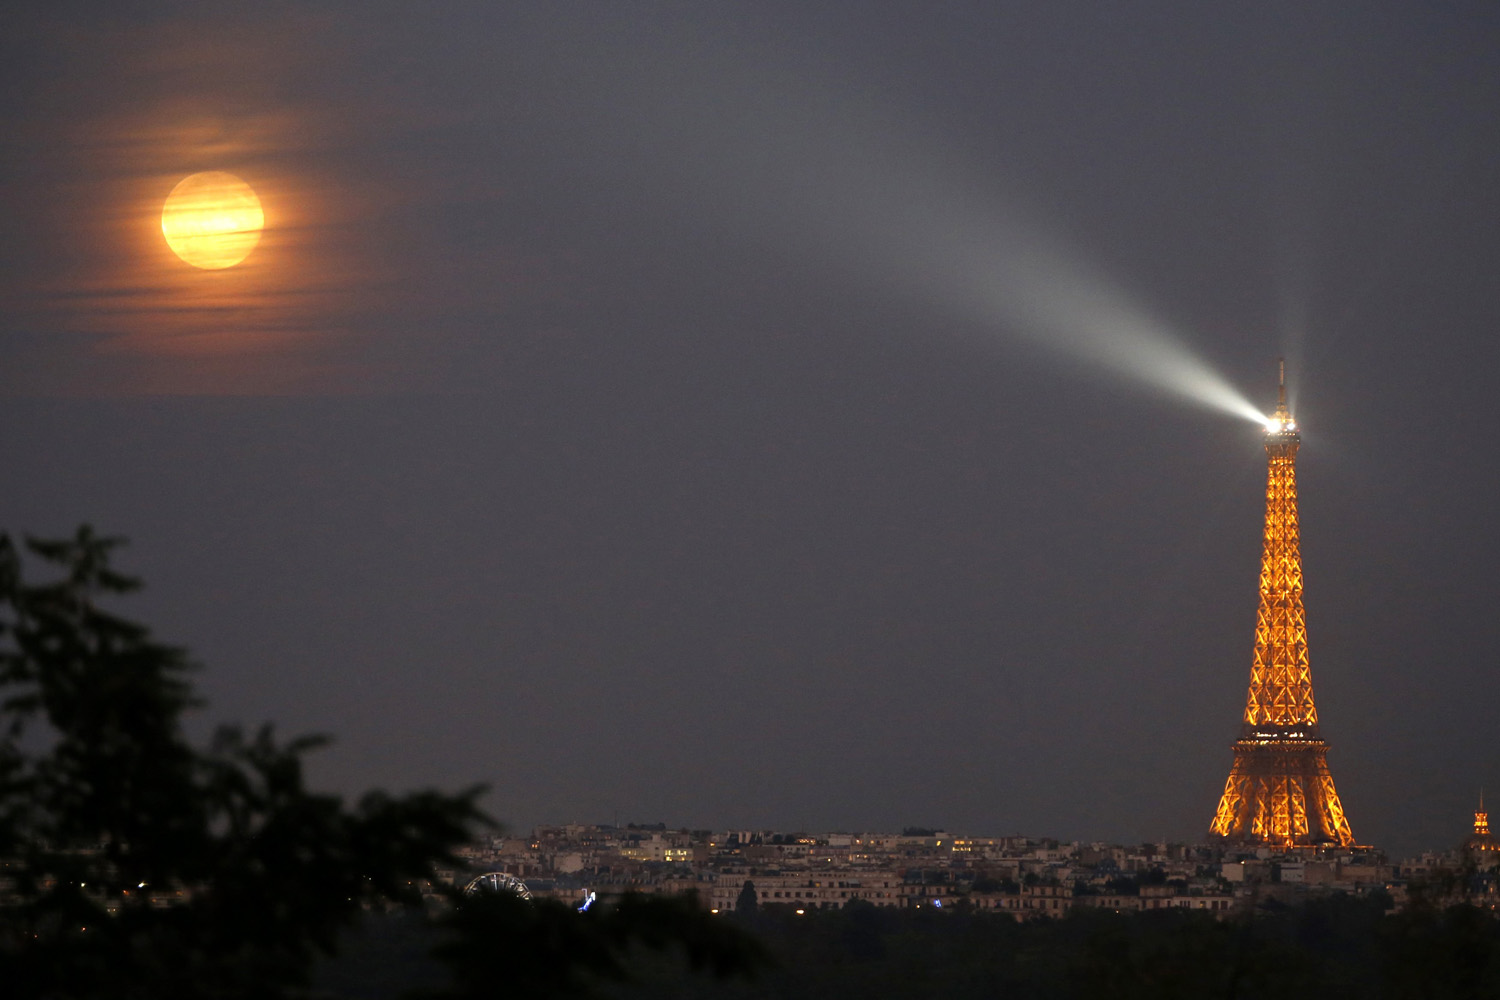 A super moon rises in the sky near the Eiffel tower as seen from Suresnes, Western Paris on Sept. 9, 2014.